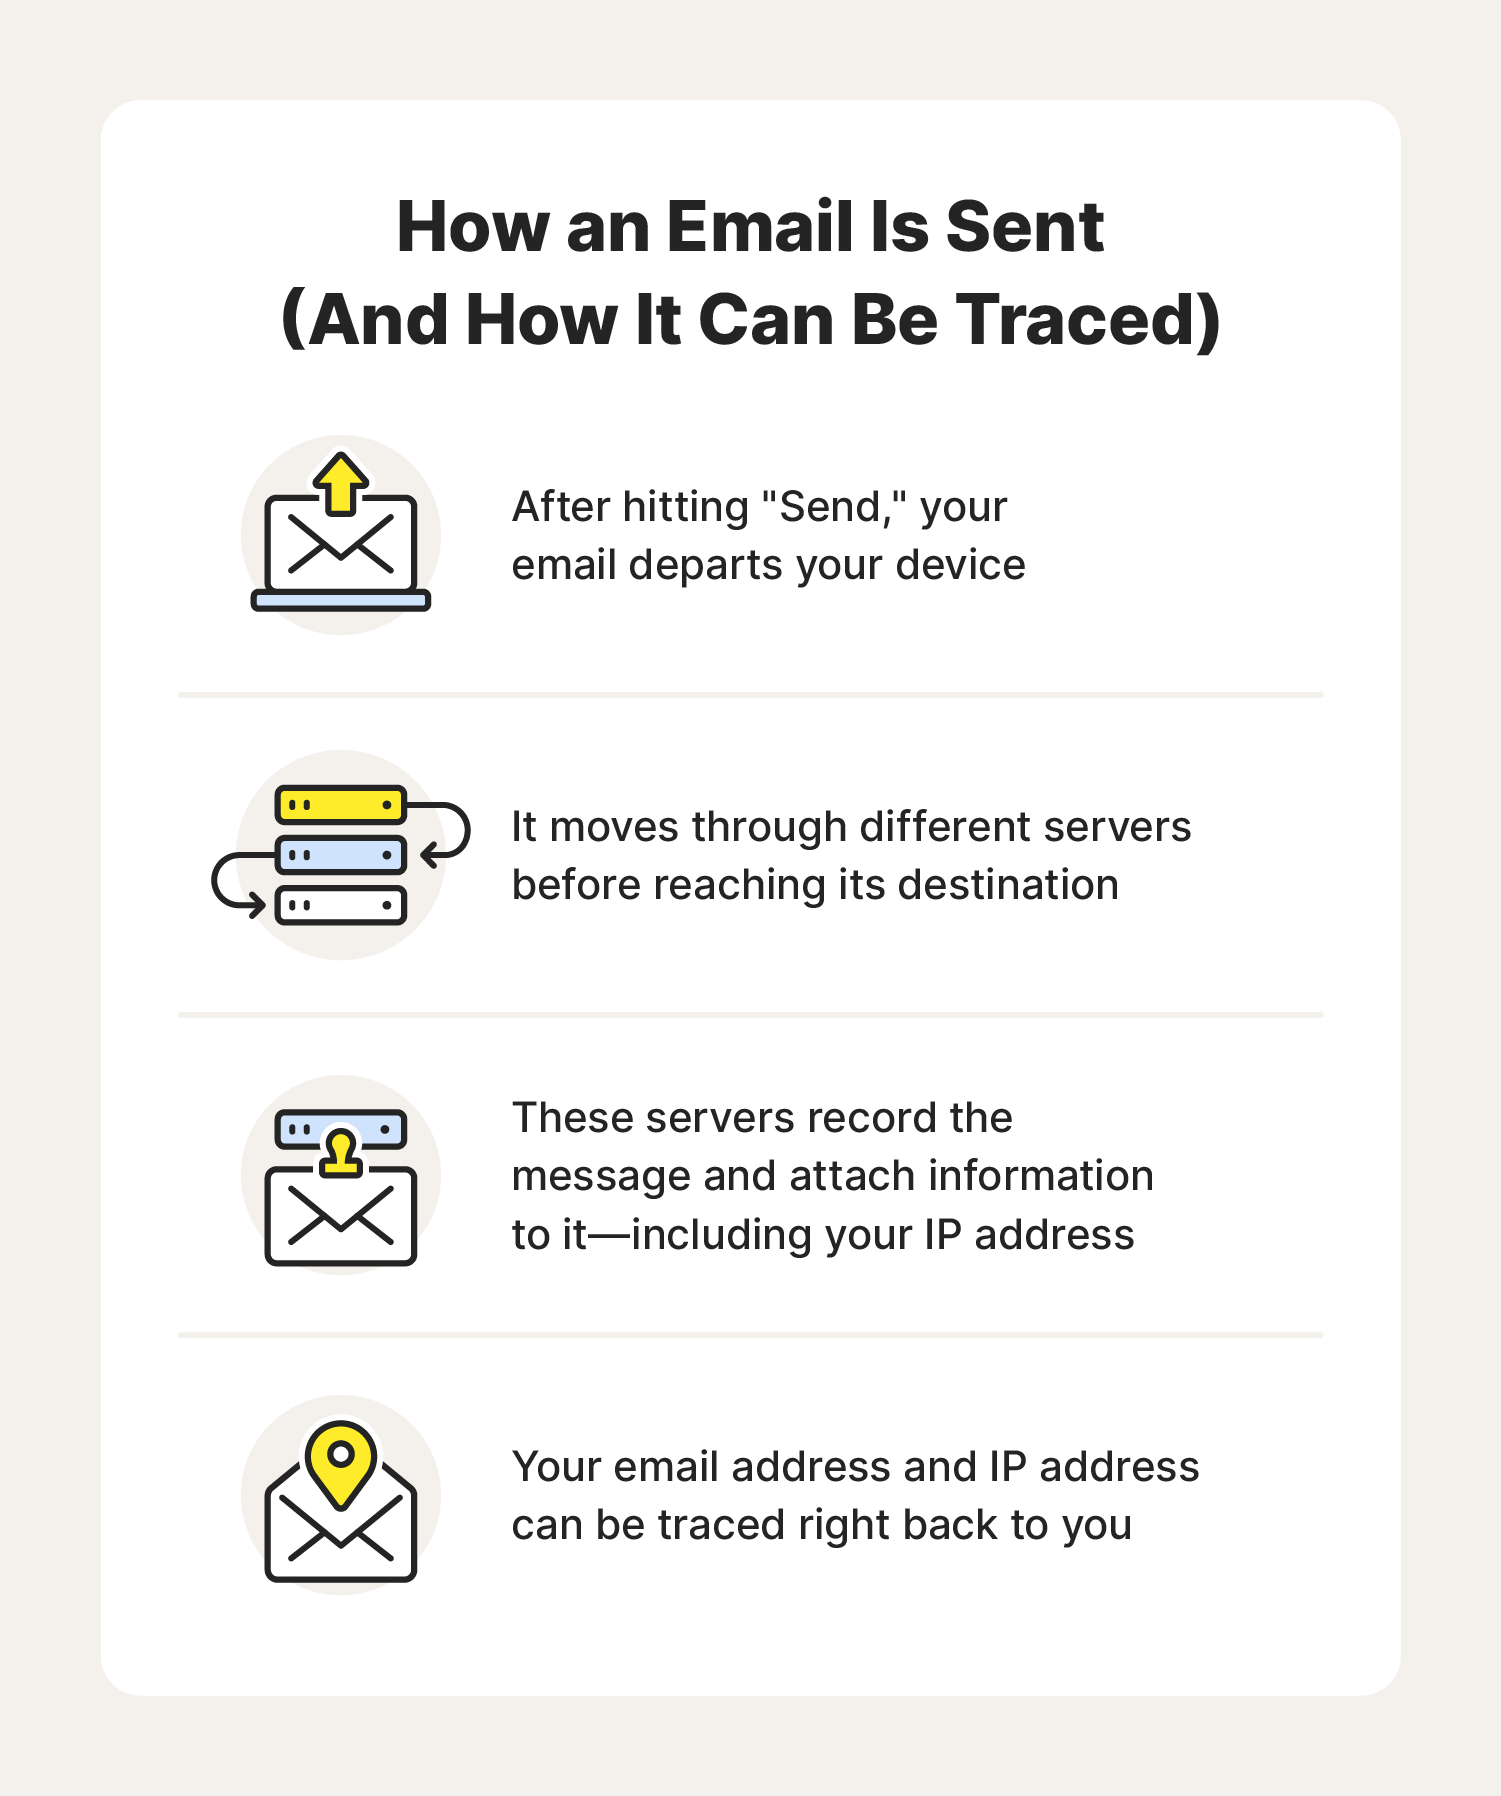 Illustrated chart covering the basic process of how an email is sent and how an email can be traced back to you.